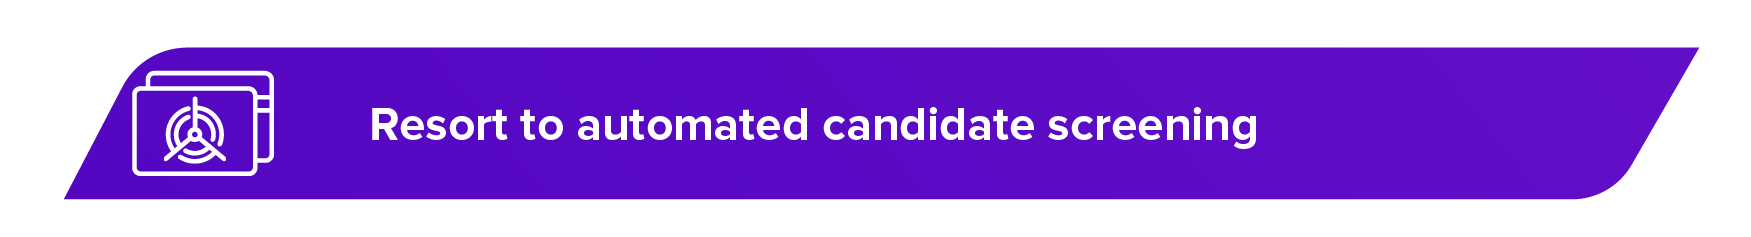 Automated Candidate Screening